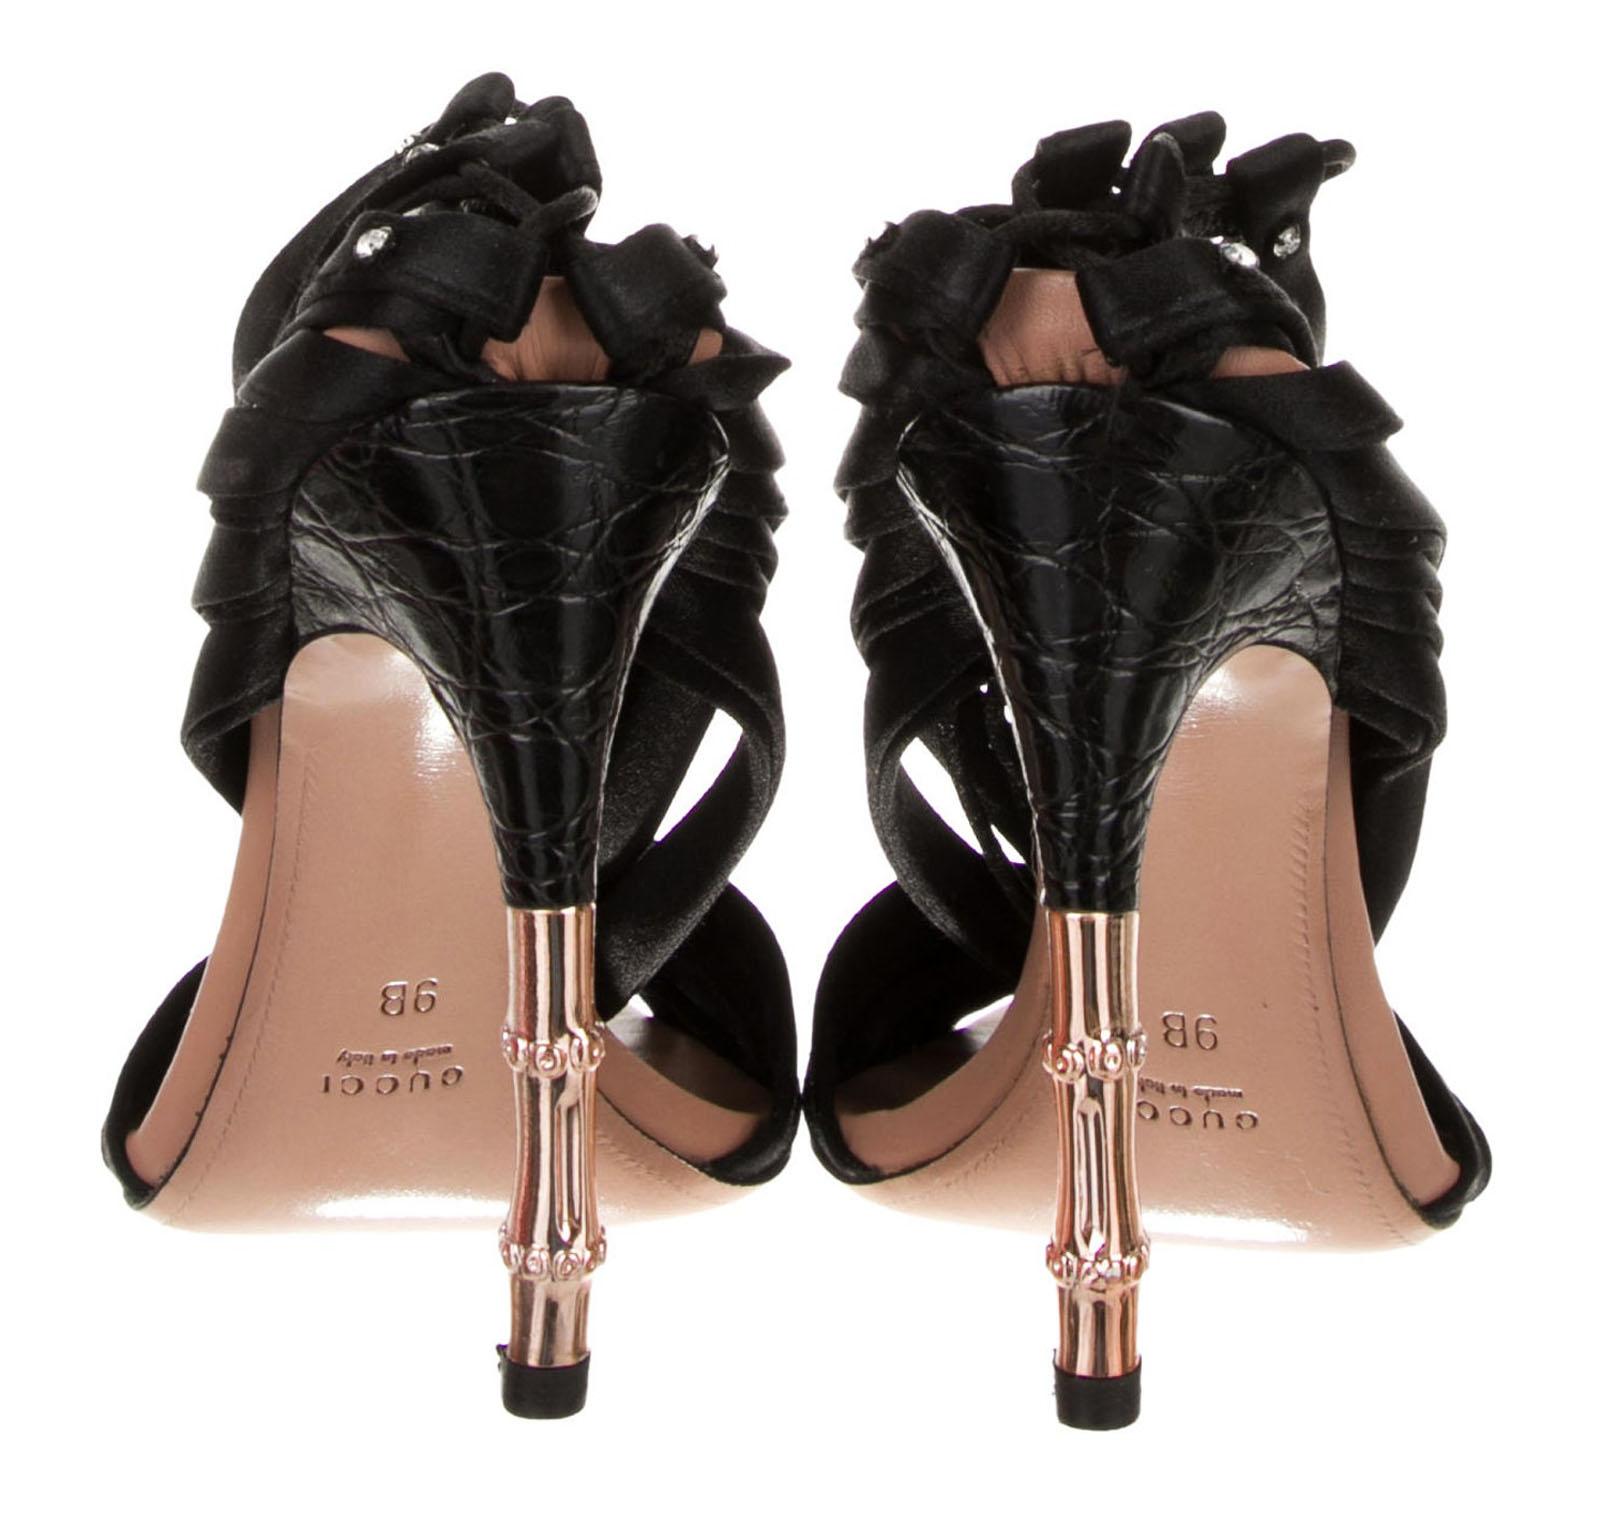  TOM FORD for GUCCI S/S 2004 Black Croc Satin Crystal Corset Shoes Sandals 6.5 5